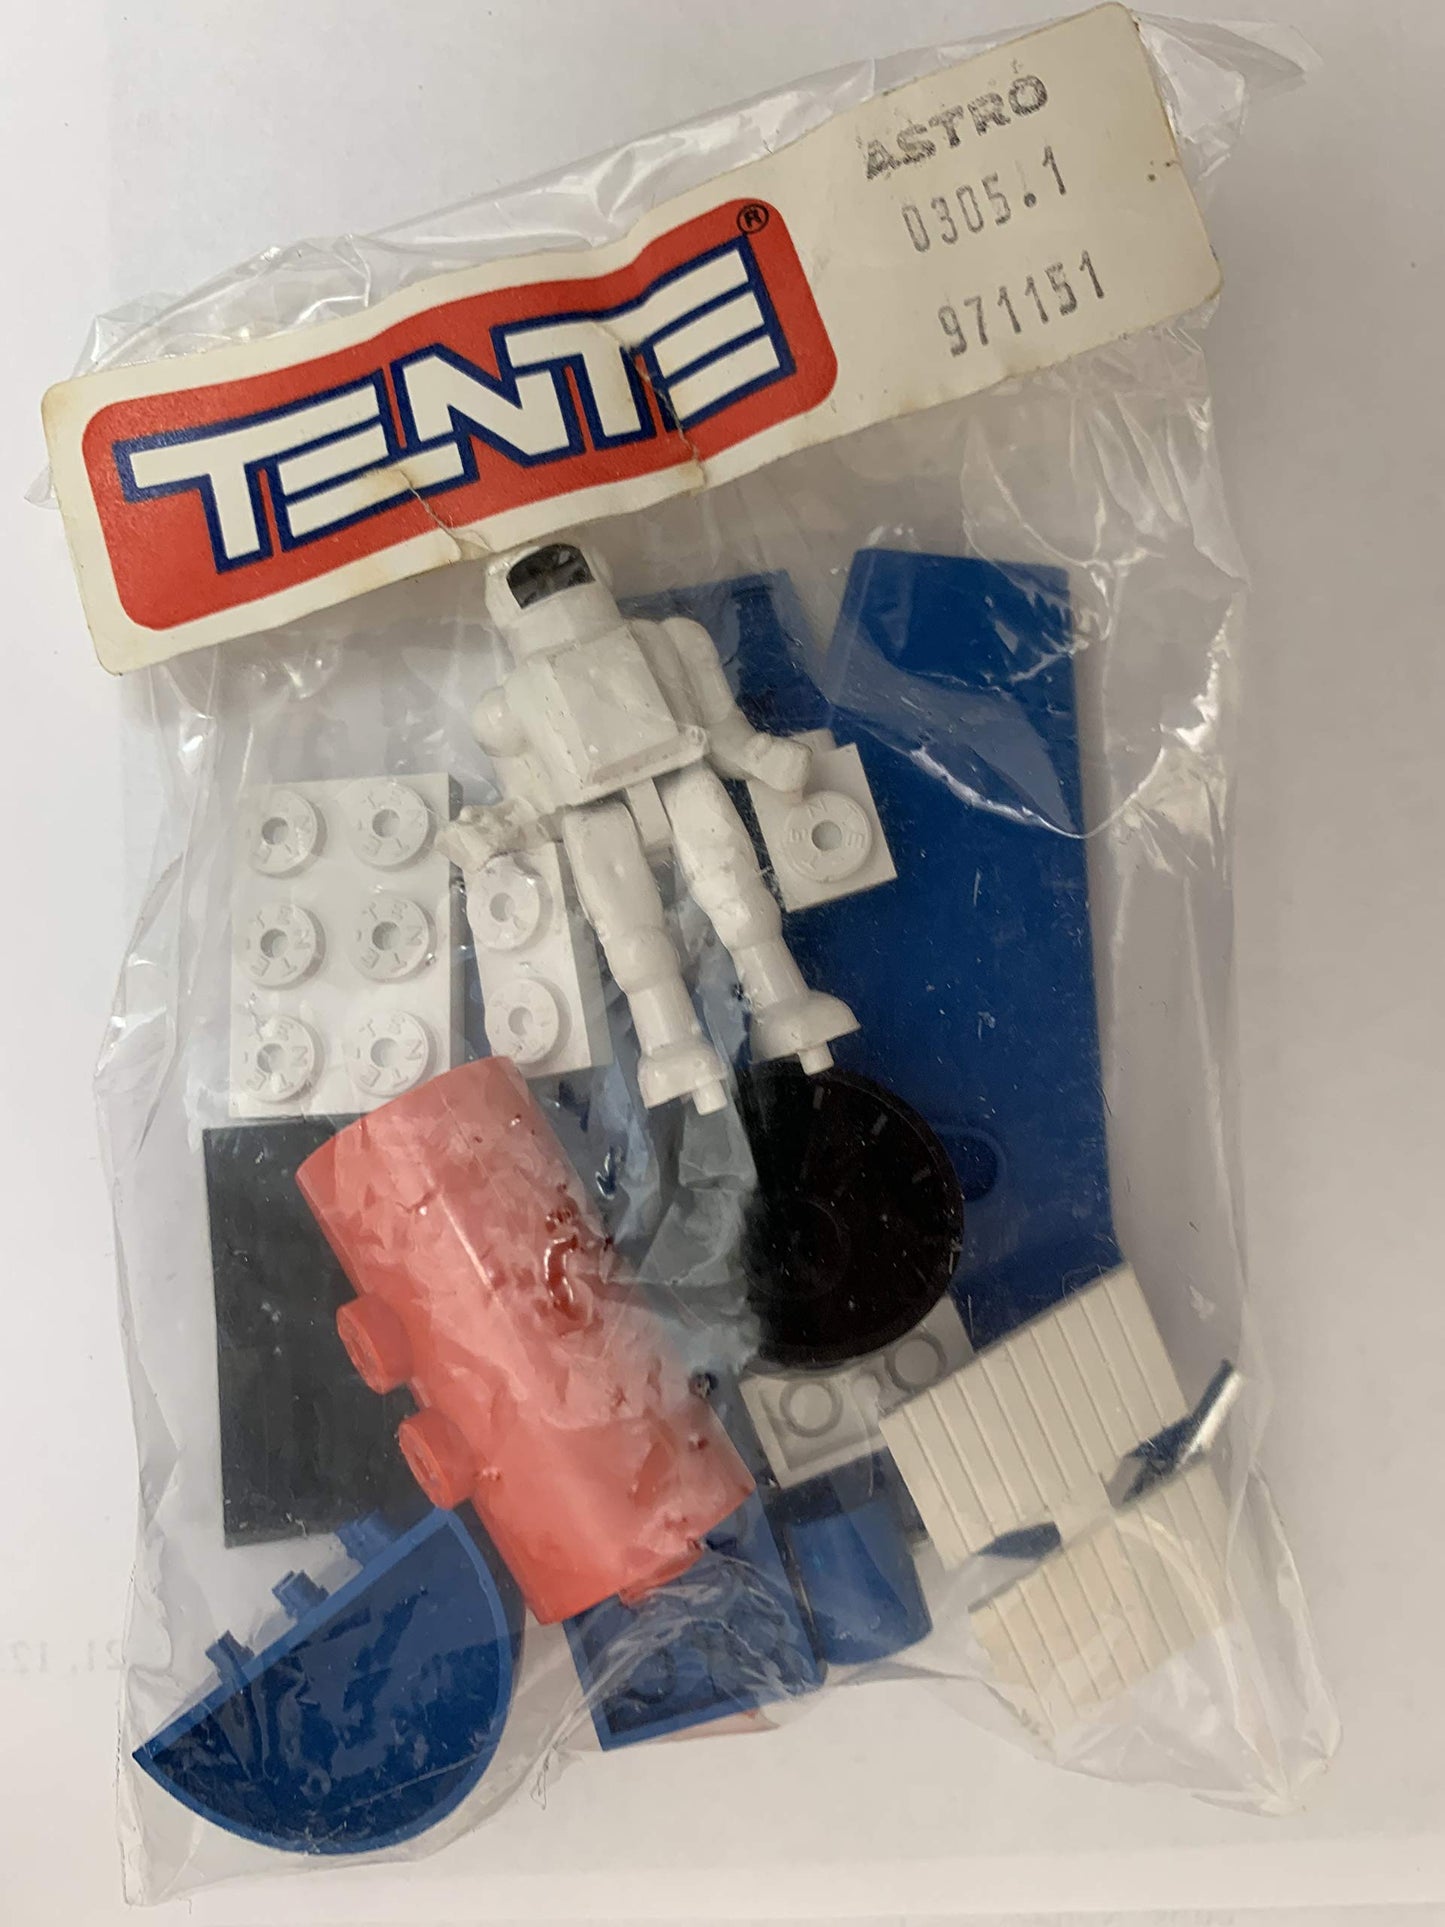 Vintage 1970's Tente Astro Jet Building Blocks Toy Set No. 06305 - A Chad Valley Construction Toy By Denys Fisher - Shop Stock Room Find